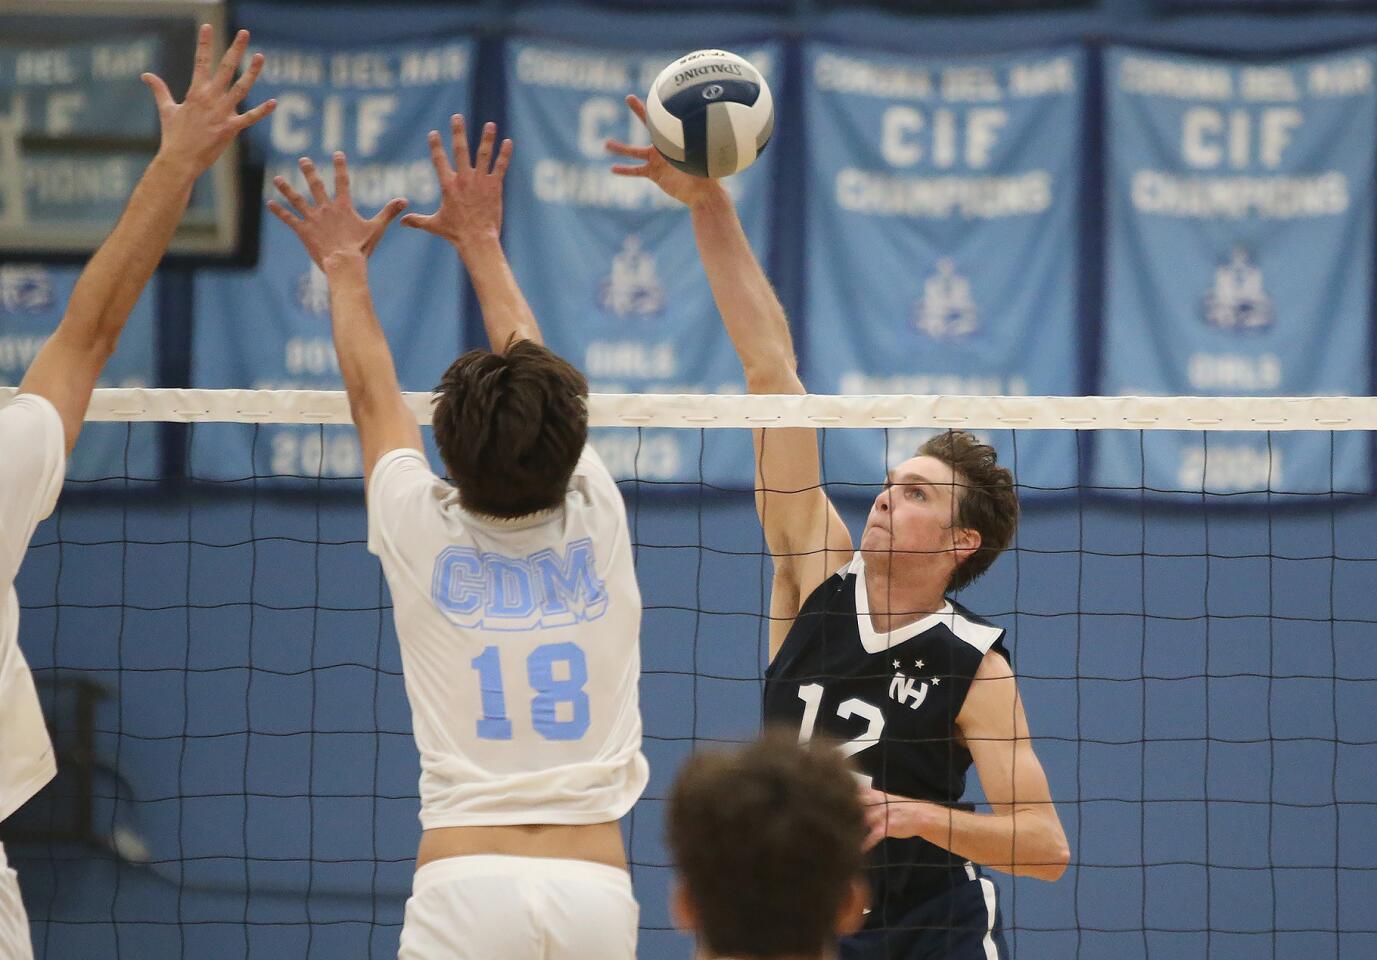 Newport Harbor's Dayne Chalmers (12) puts a kill past Corona Del Mar blocker Bryce Dvorak (18) during second round of the Battle of the Bay boys' volleyball match in Surf League play on Wednesday.